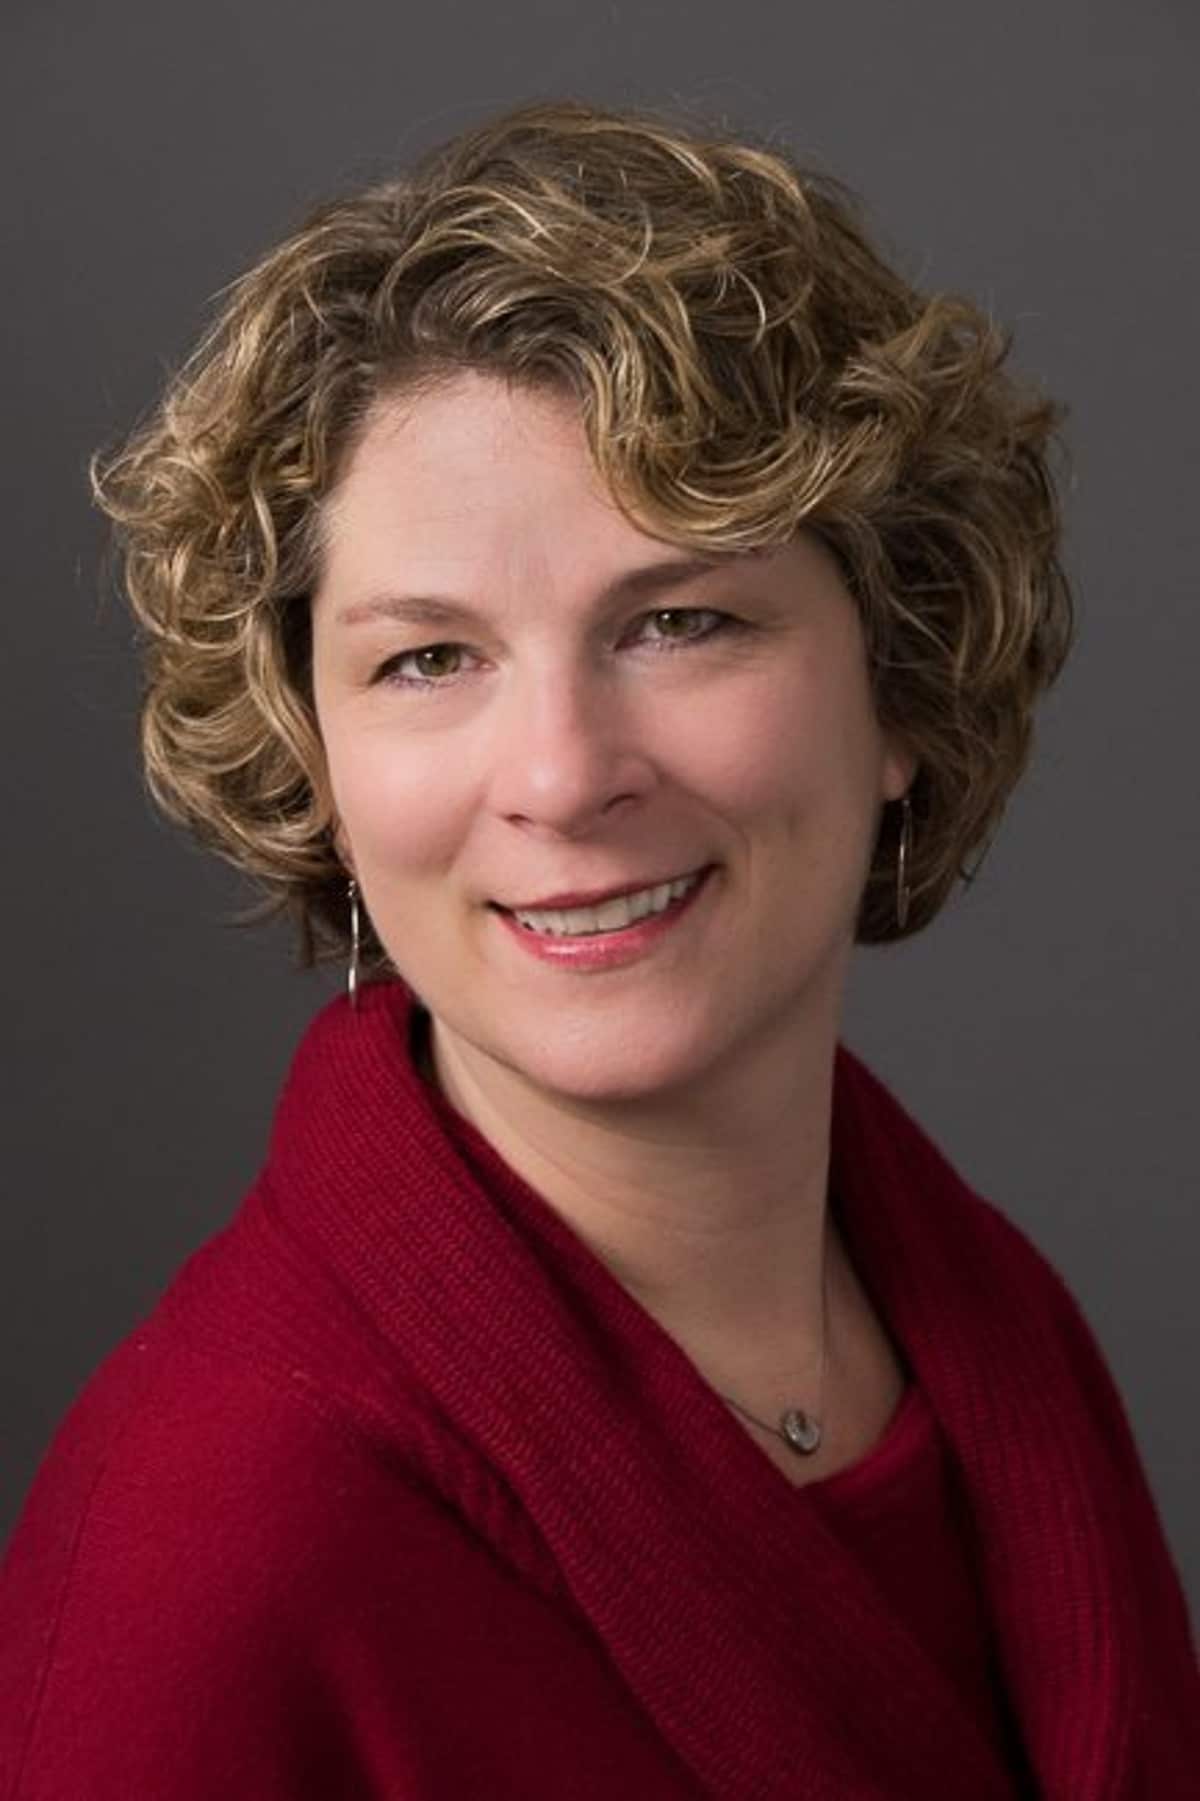 headshot of a middle-aged female event planner looking towards camera